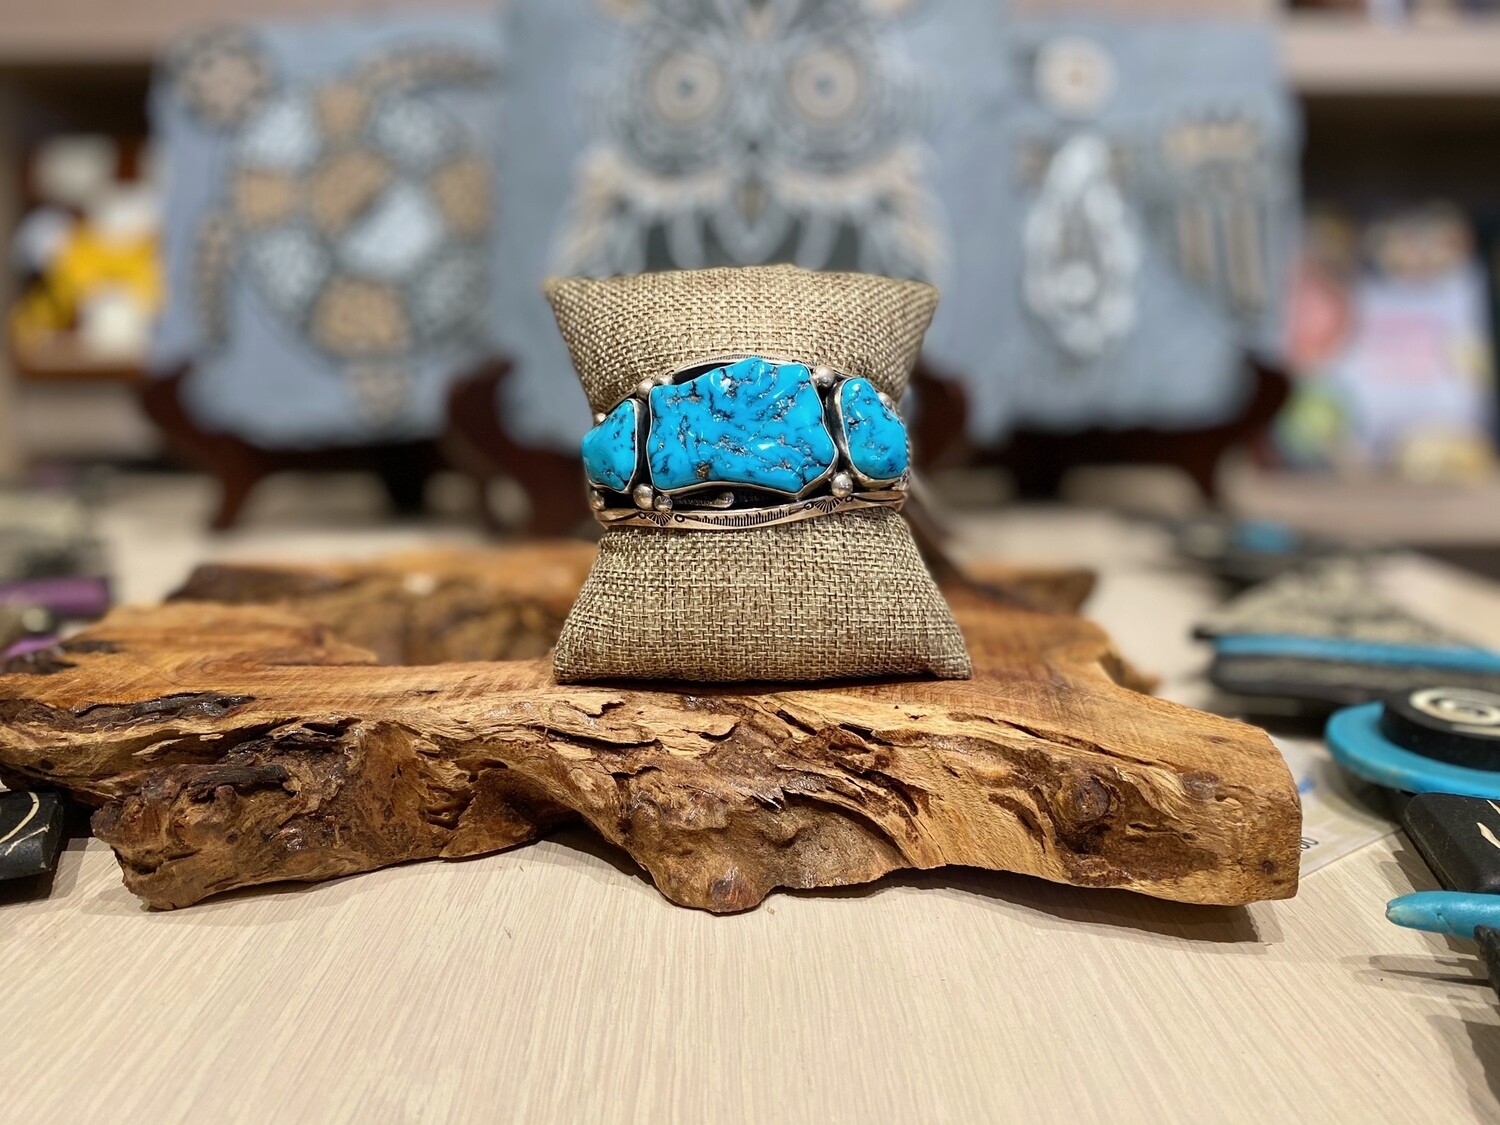 Silver and Turquoise Chunk Bracelet by Jeannette Dale